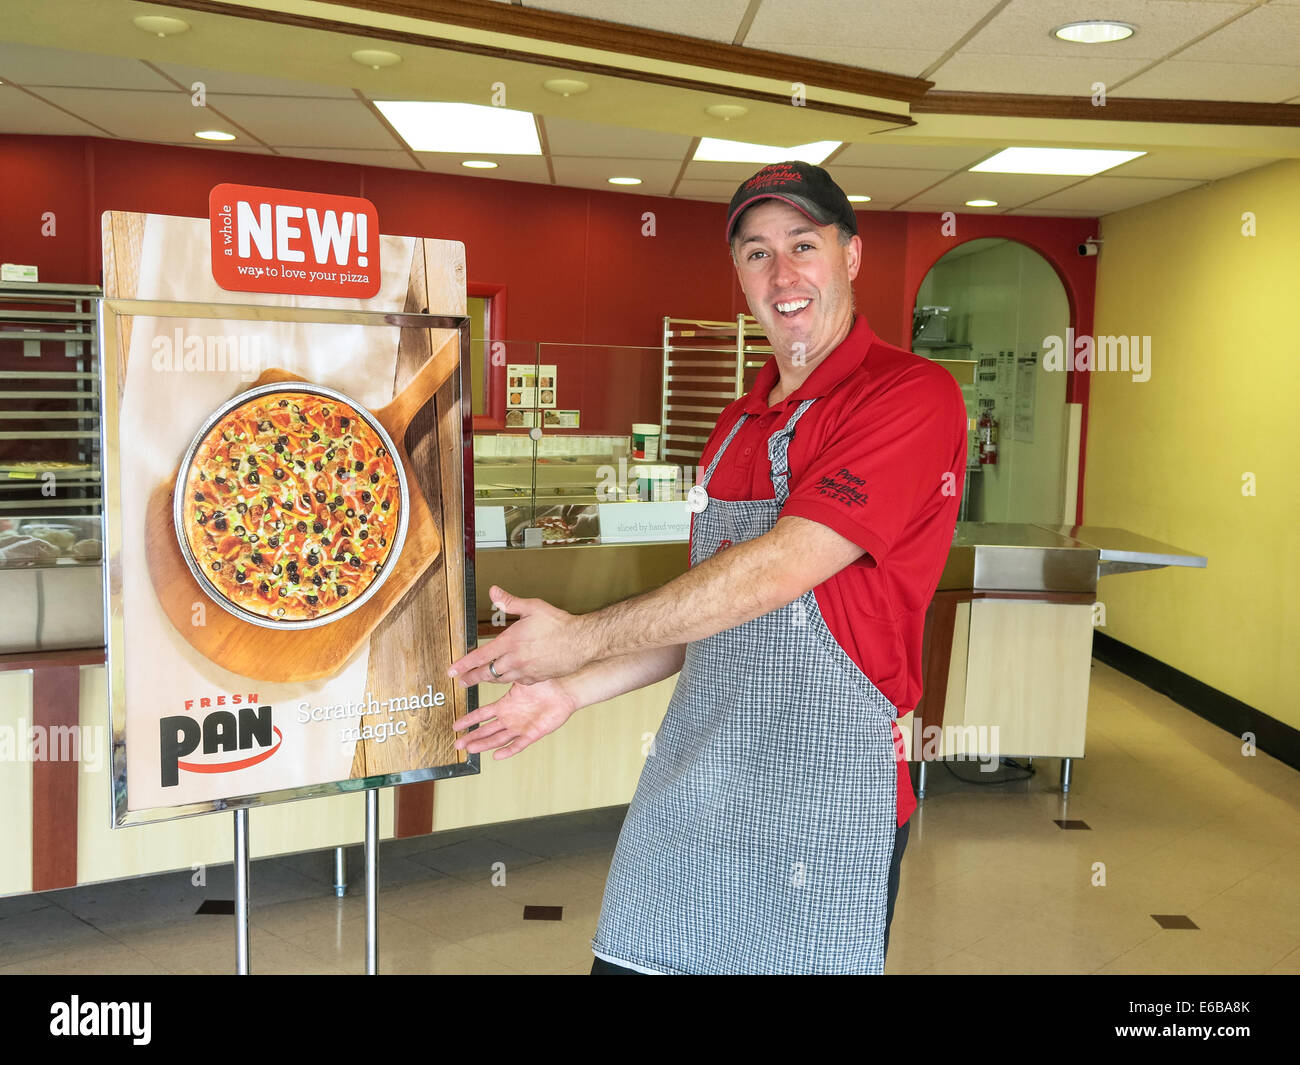 Small Business Owner of Pizza Shop with Instore Feature Ad, USA Stock Photo